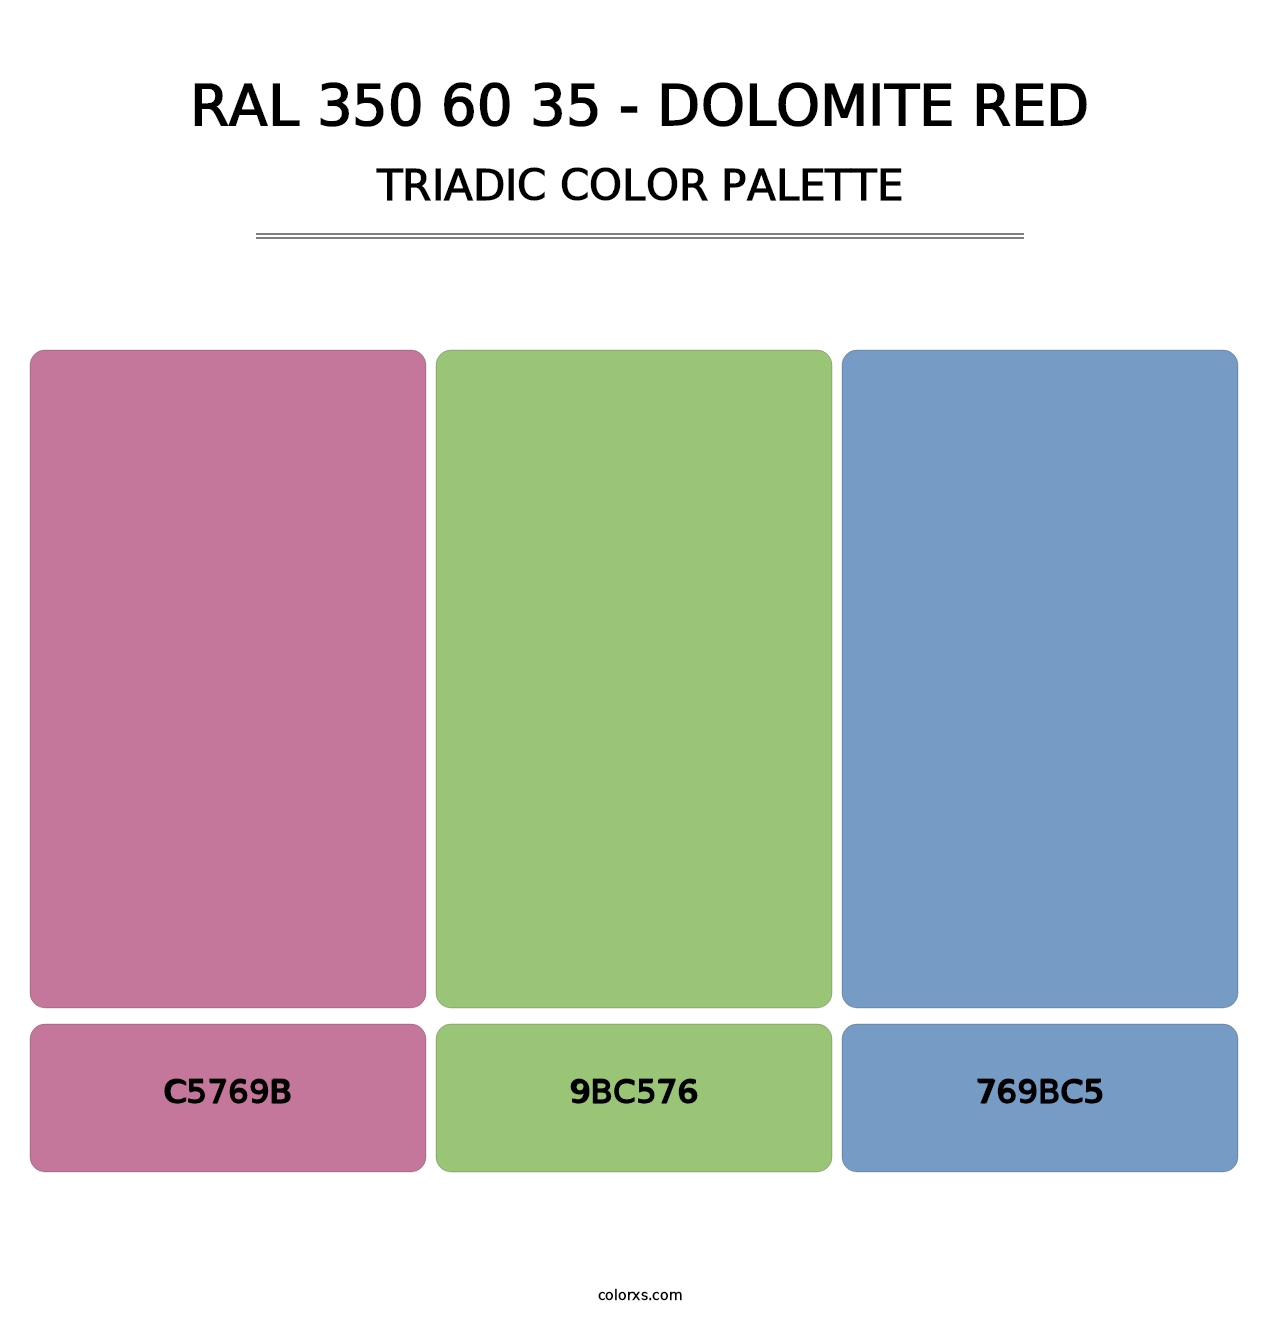 RAL 350 60 35 - Dolomite Red - Triadic Color Palette